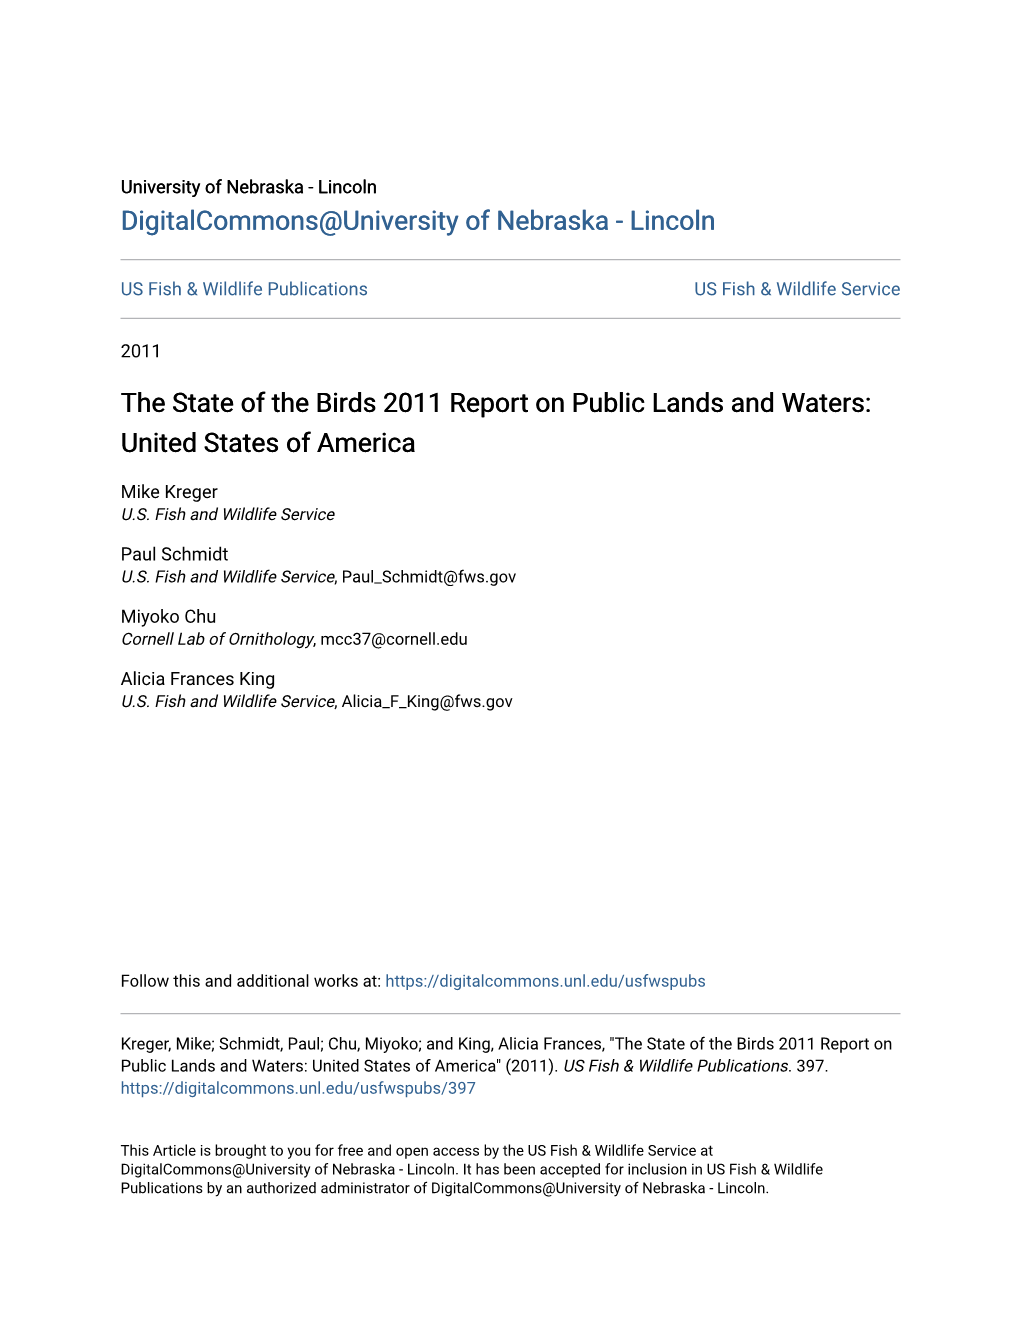 The State of the Birds 2011 Report on Public Lands and Waters: United States of America